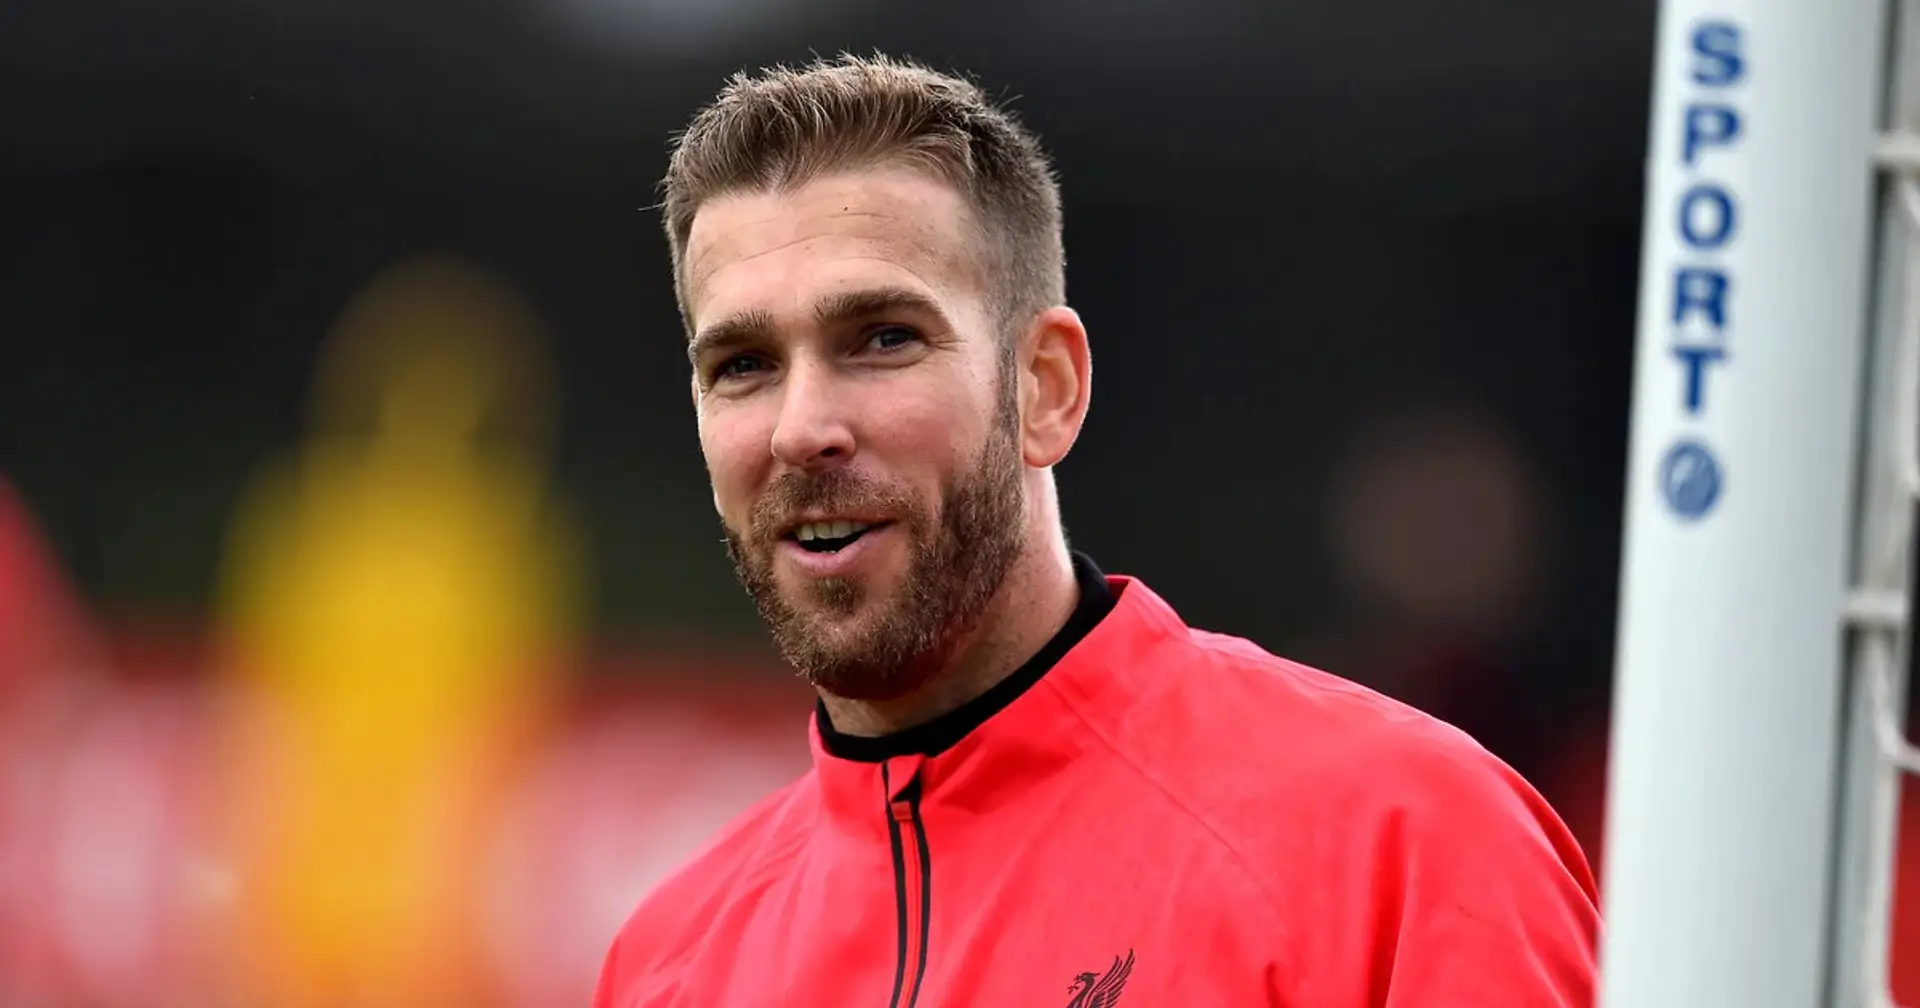 Will Adrian stay at Liverpool beyond 2023/24 season?